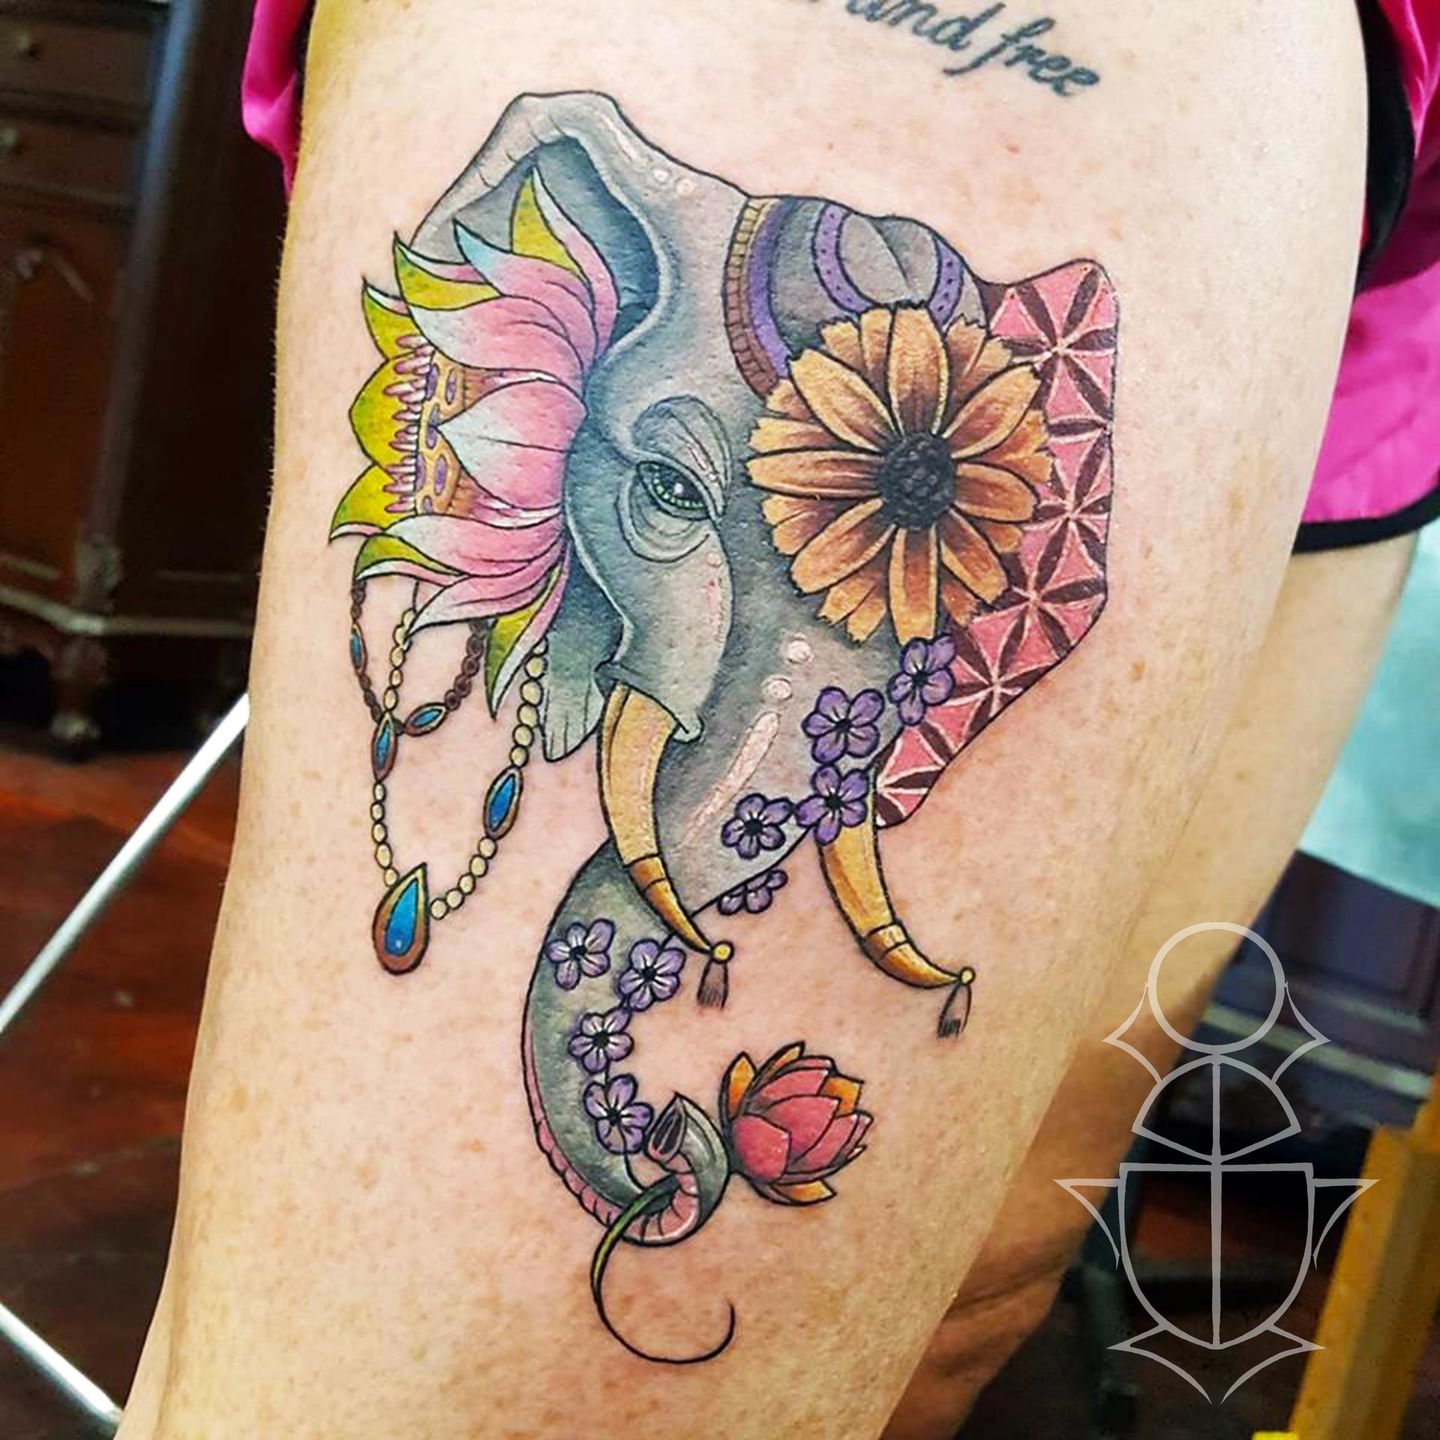 Elephant and Roses Tattoo by Adam Sky Morningstar Tattoo Parlor Belmont  Bay Area California  rtattoos